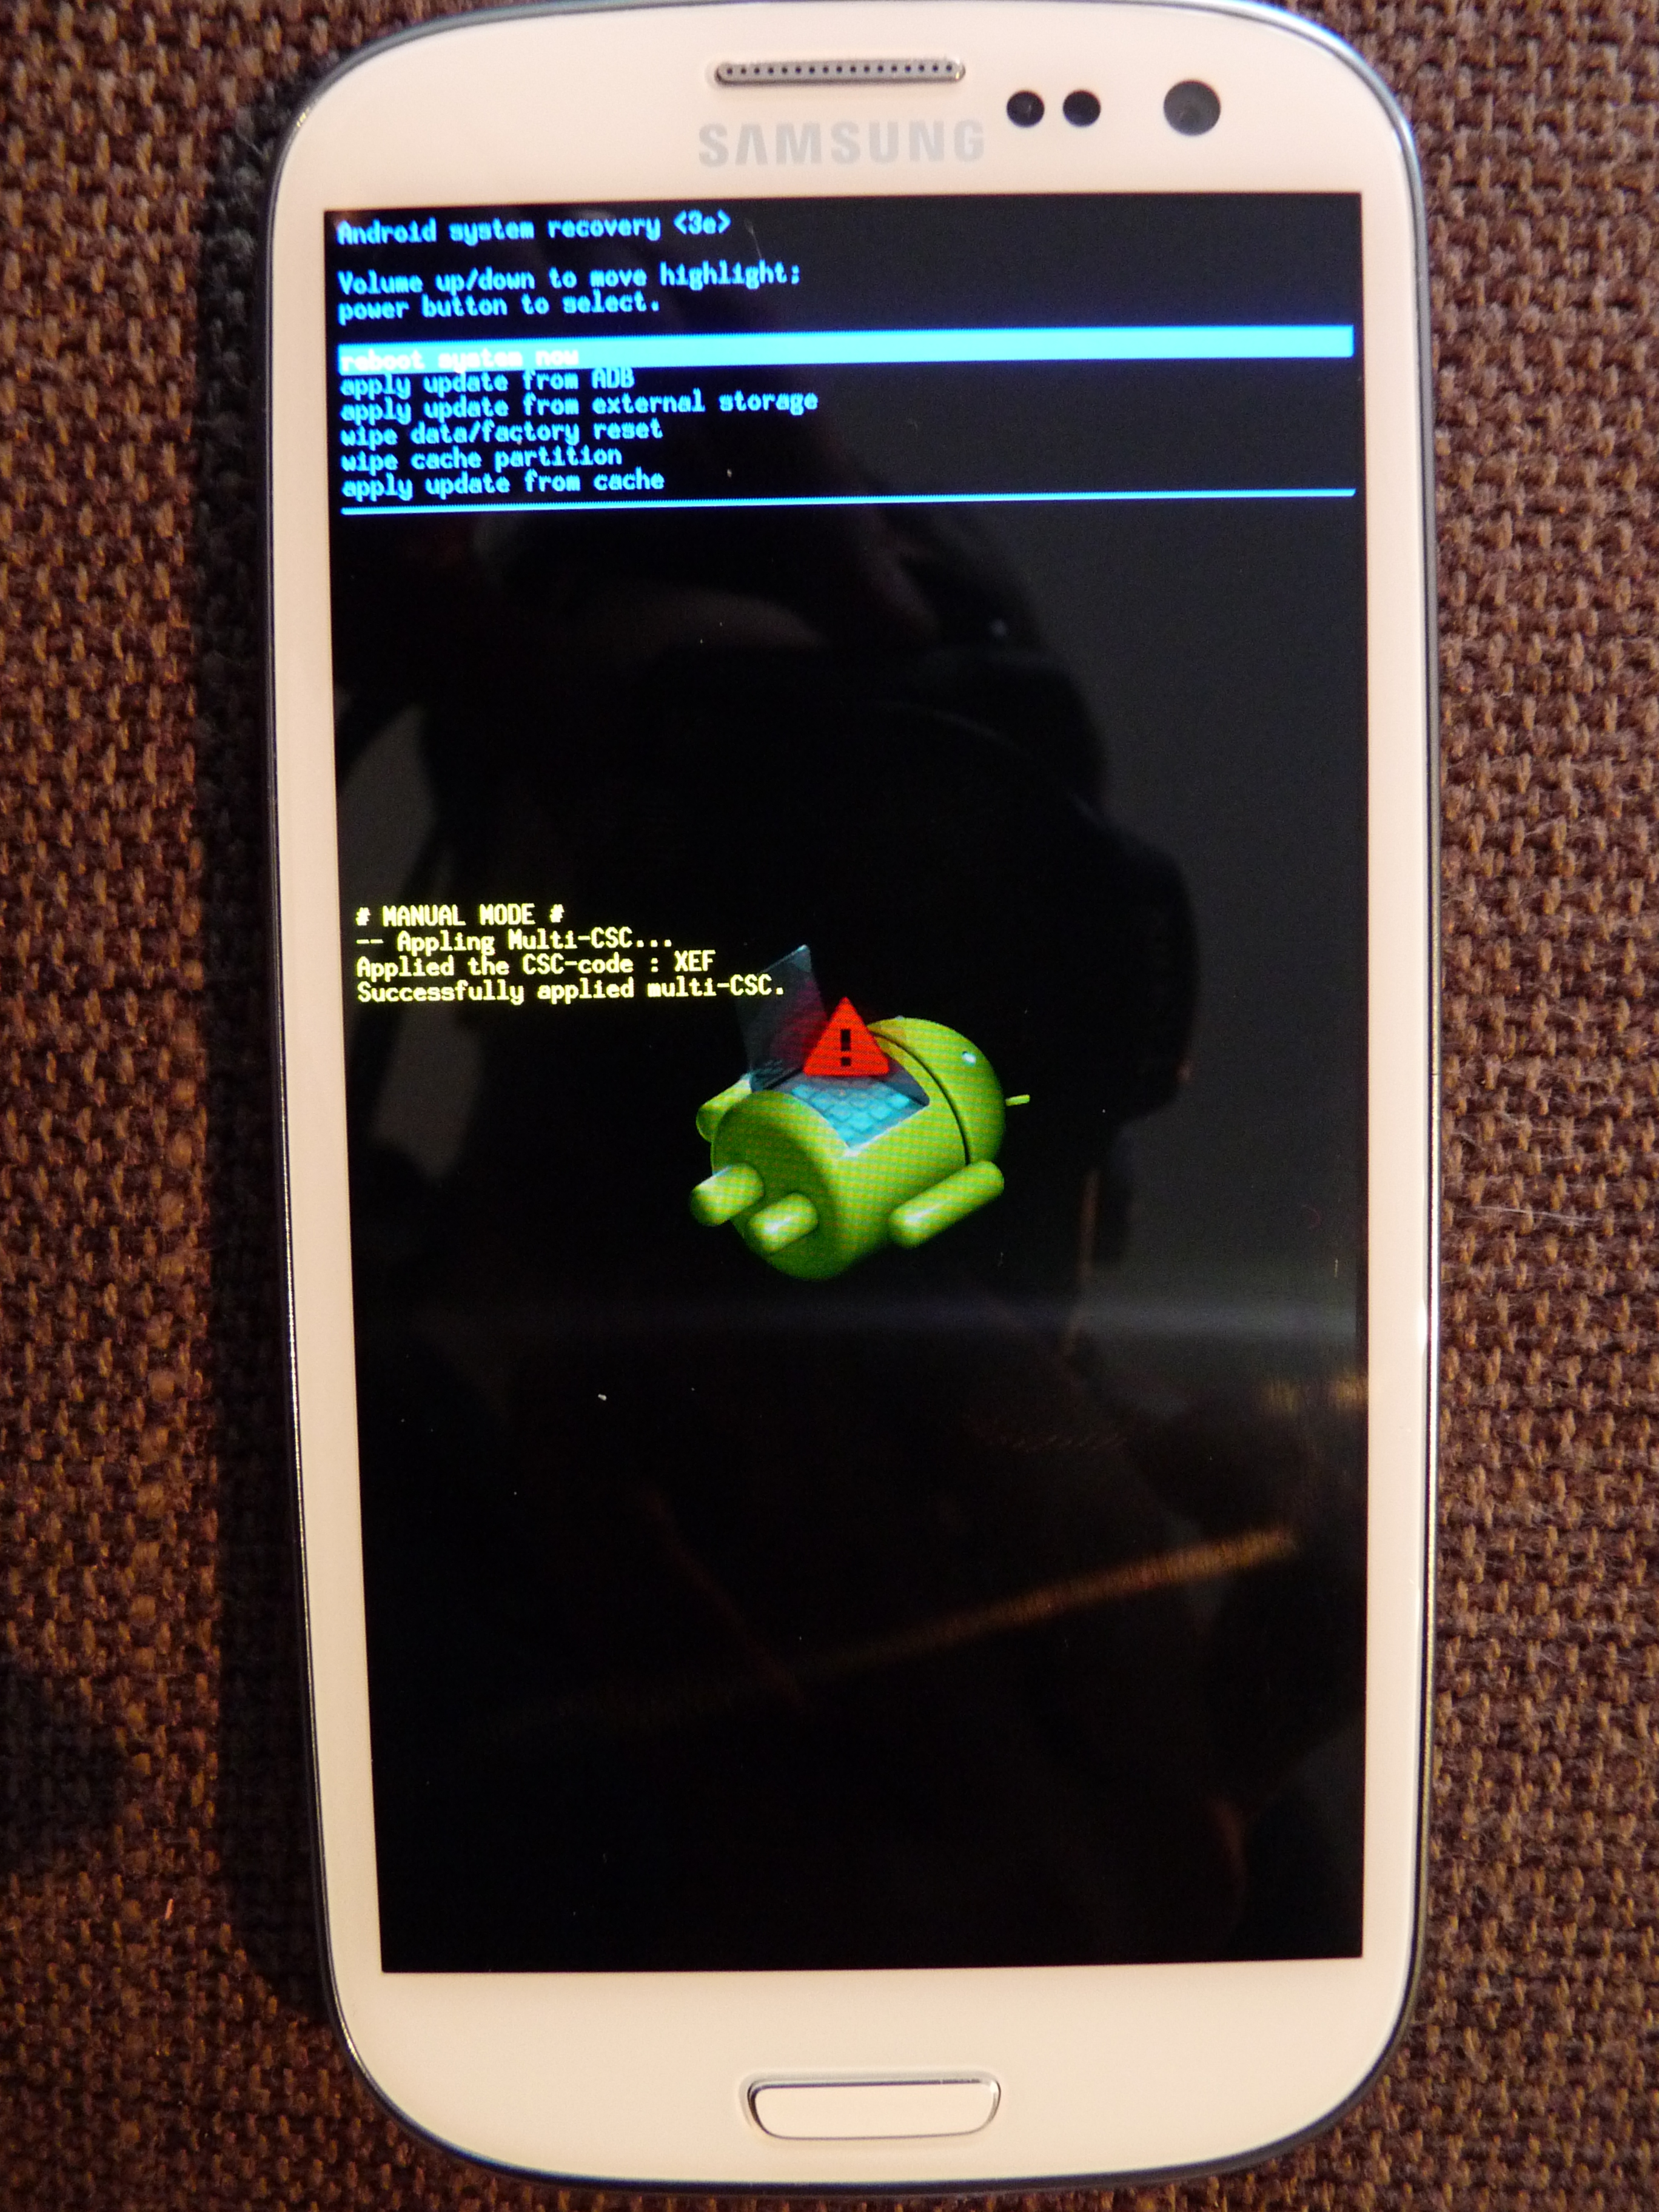 twrp recovery download for android 4.4.2